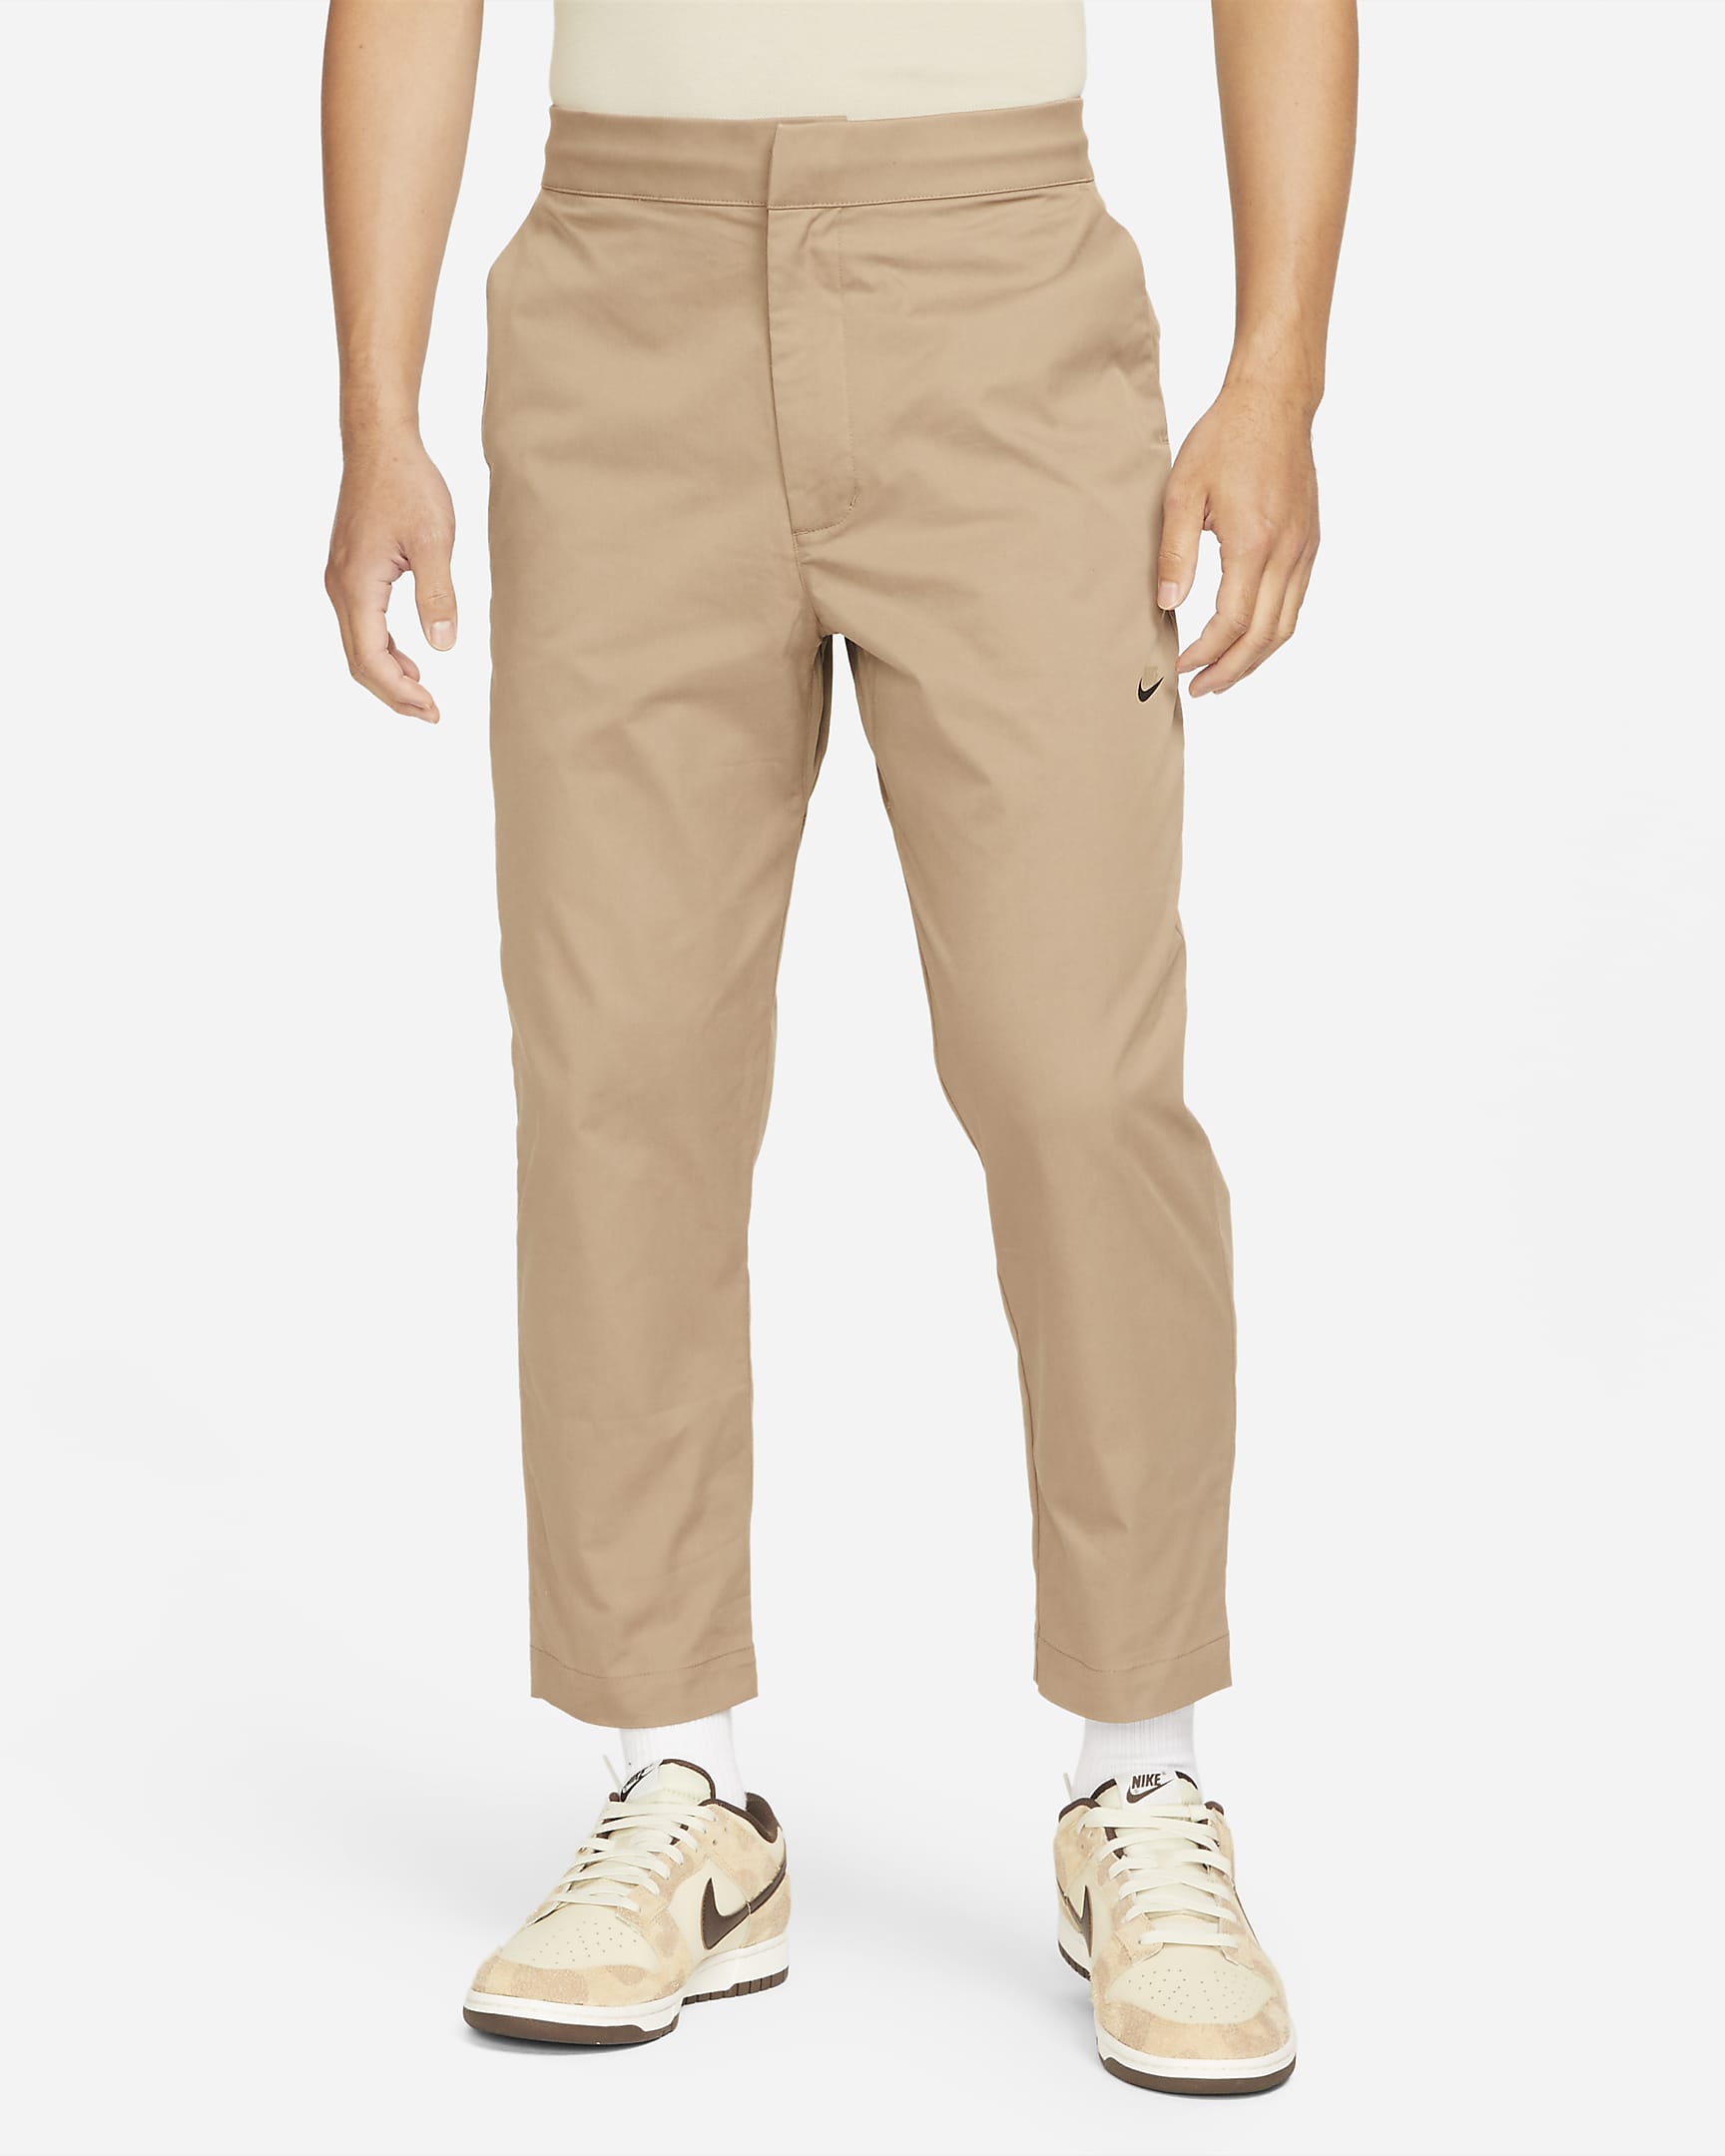 nike-sportswear-style-essentials-mens-unlined-cropped-pants-tWG7Gw.png